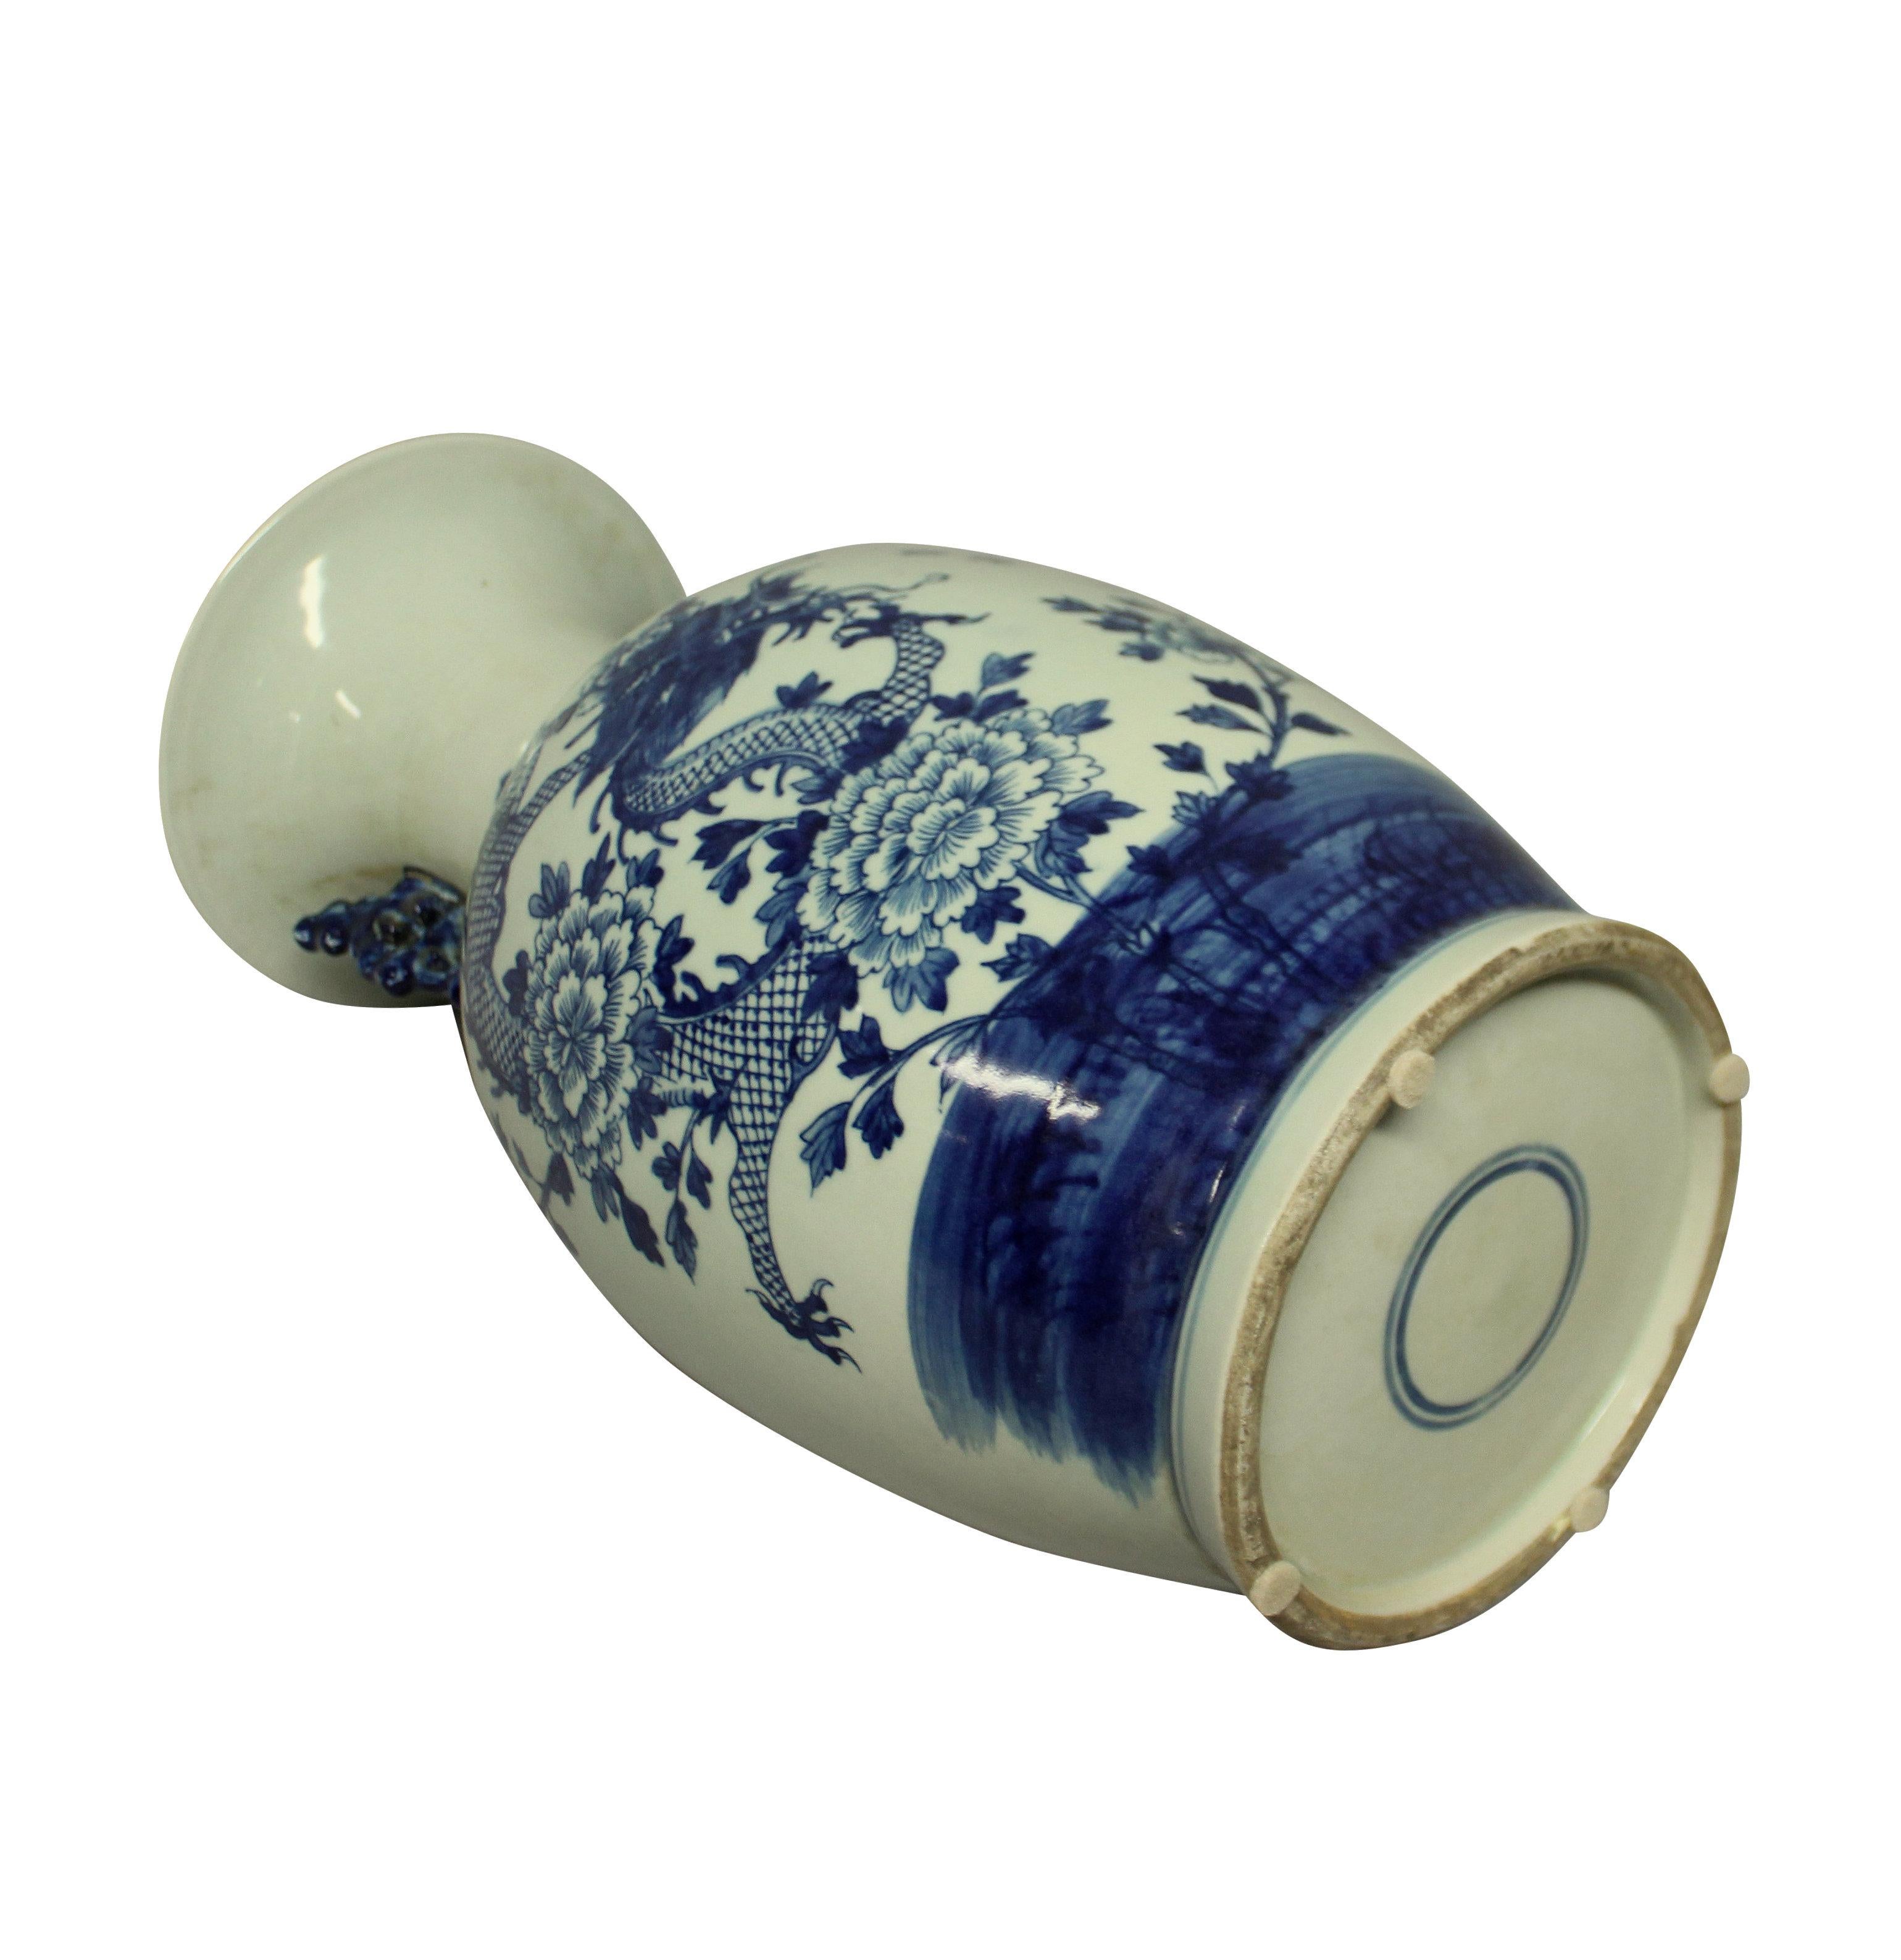 A pair of Chinese blue and white twin handled vases depicting dragons. The background color is a pale duck egg.